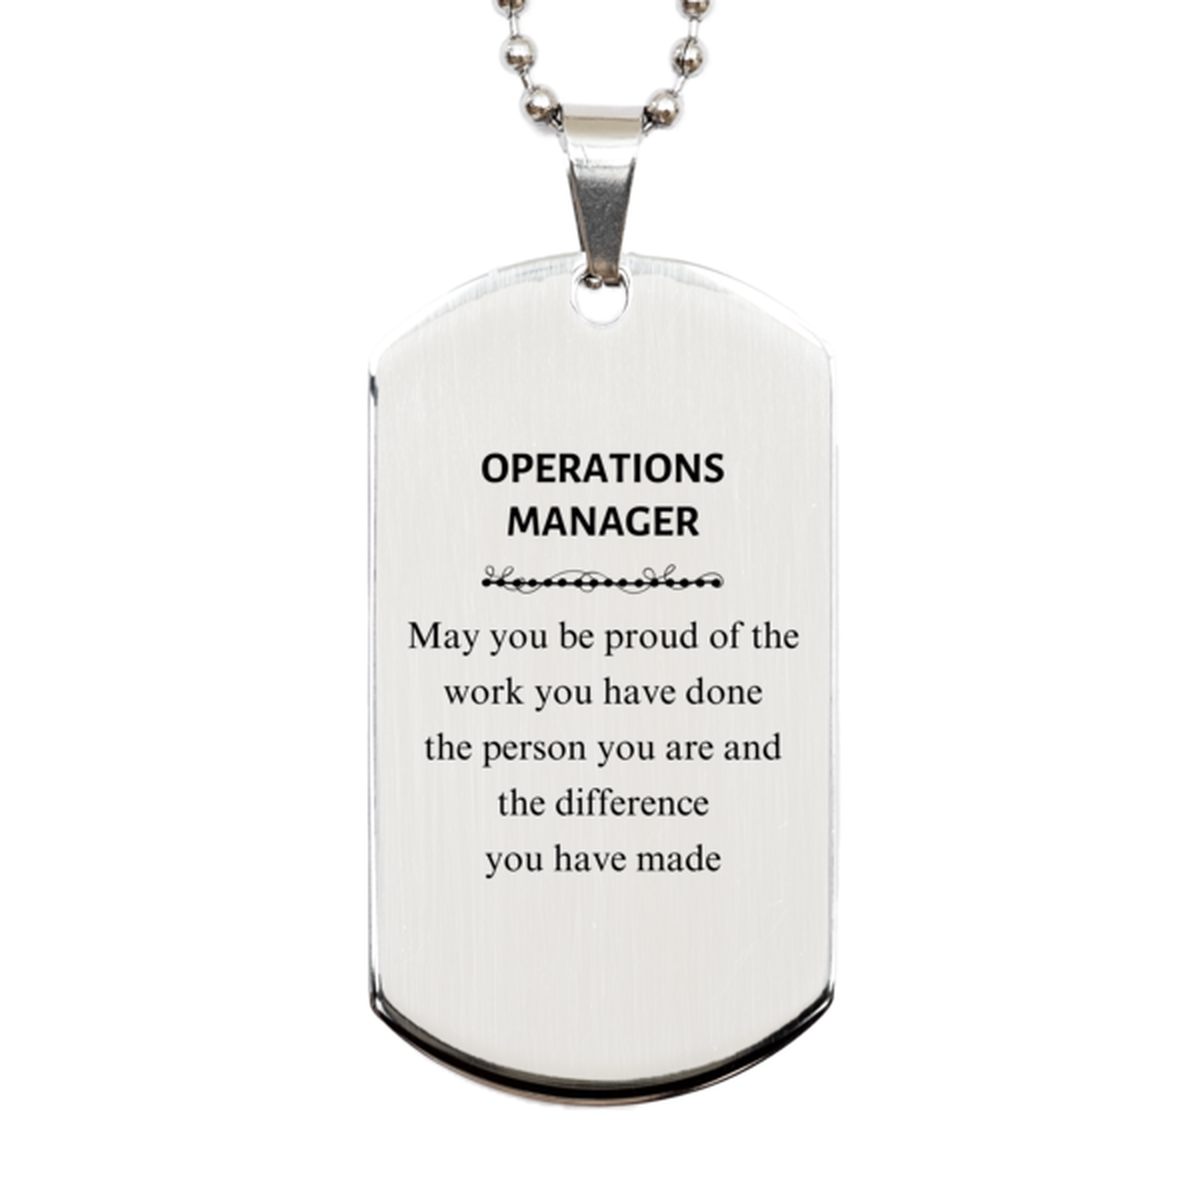 Operations Manager May you be proud of the work you have done, Retirement Operations Manager Silver Dog Tag for Colleague Appreciation Gifts Amazing for Operations Manager